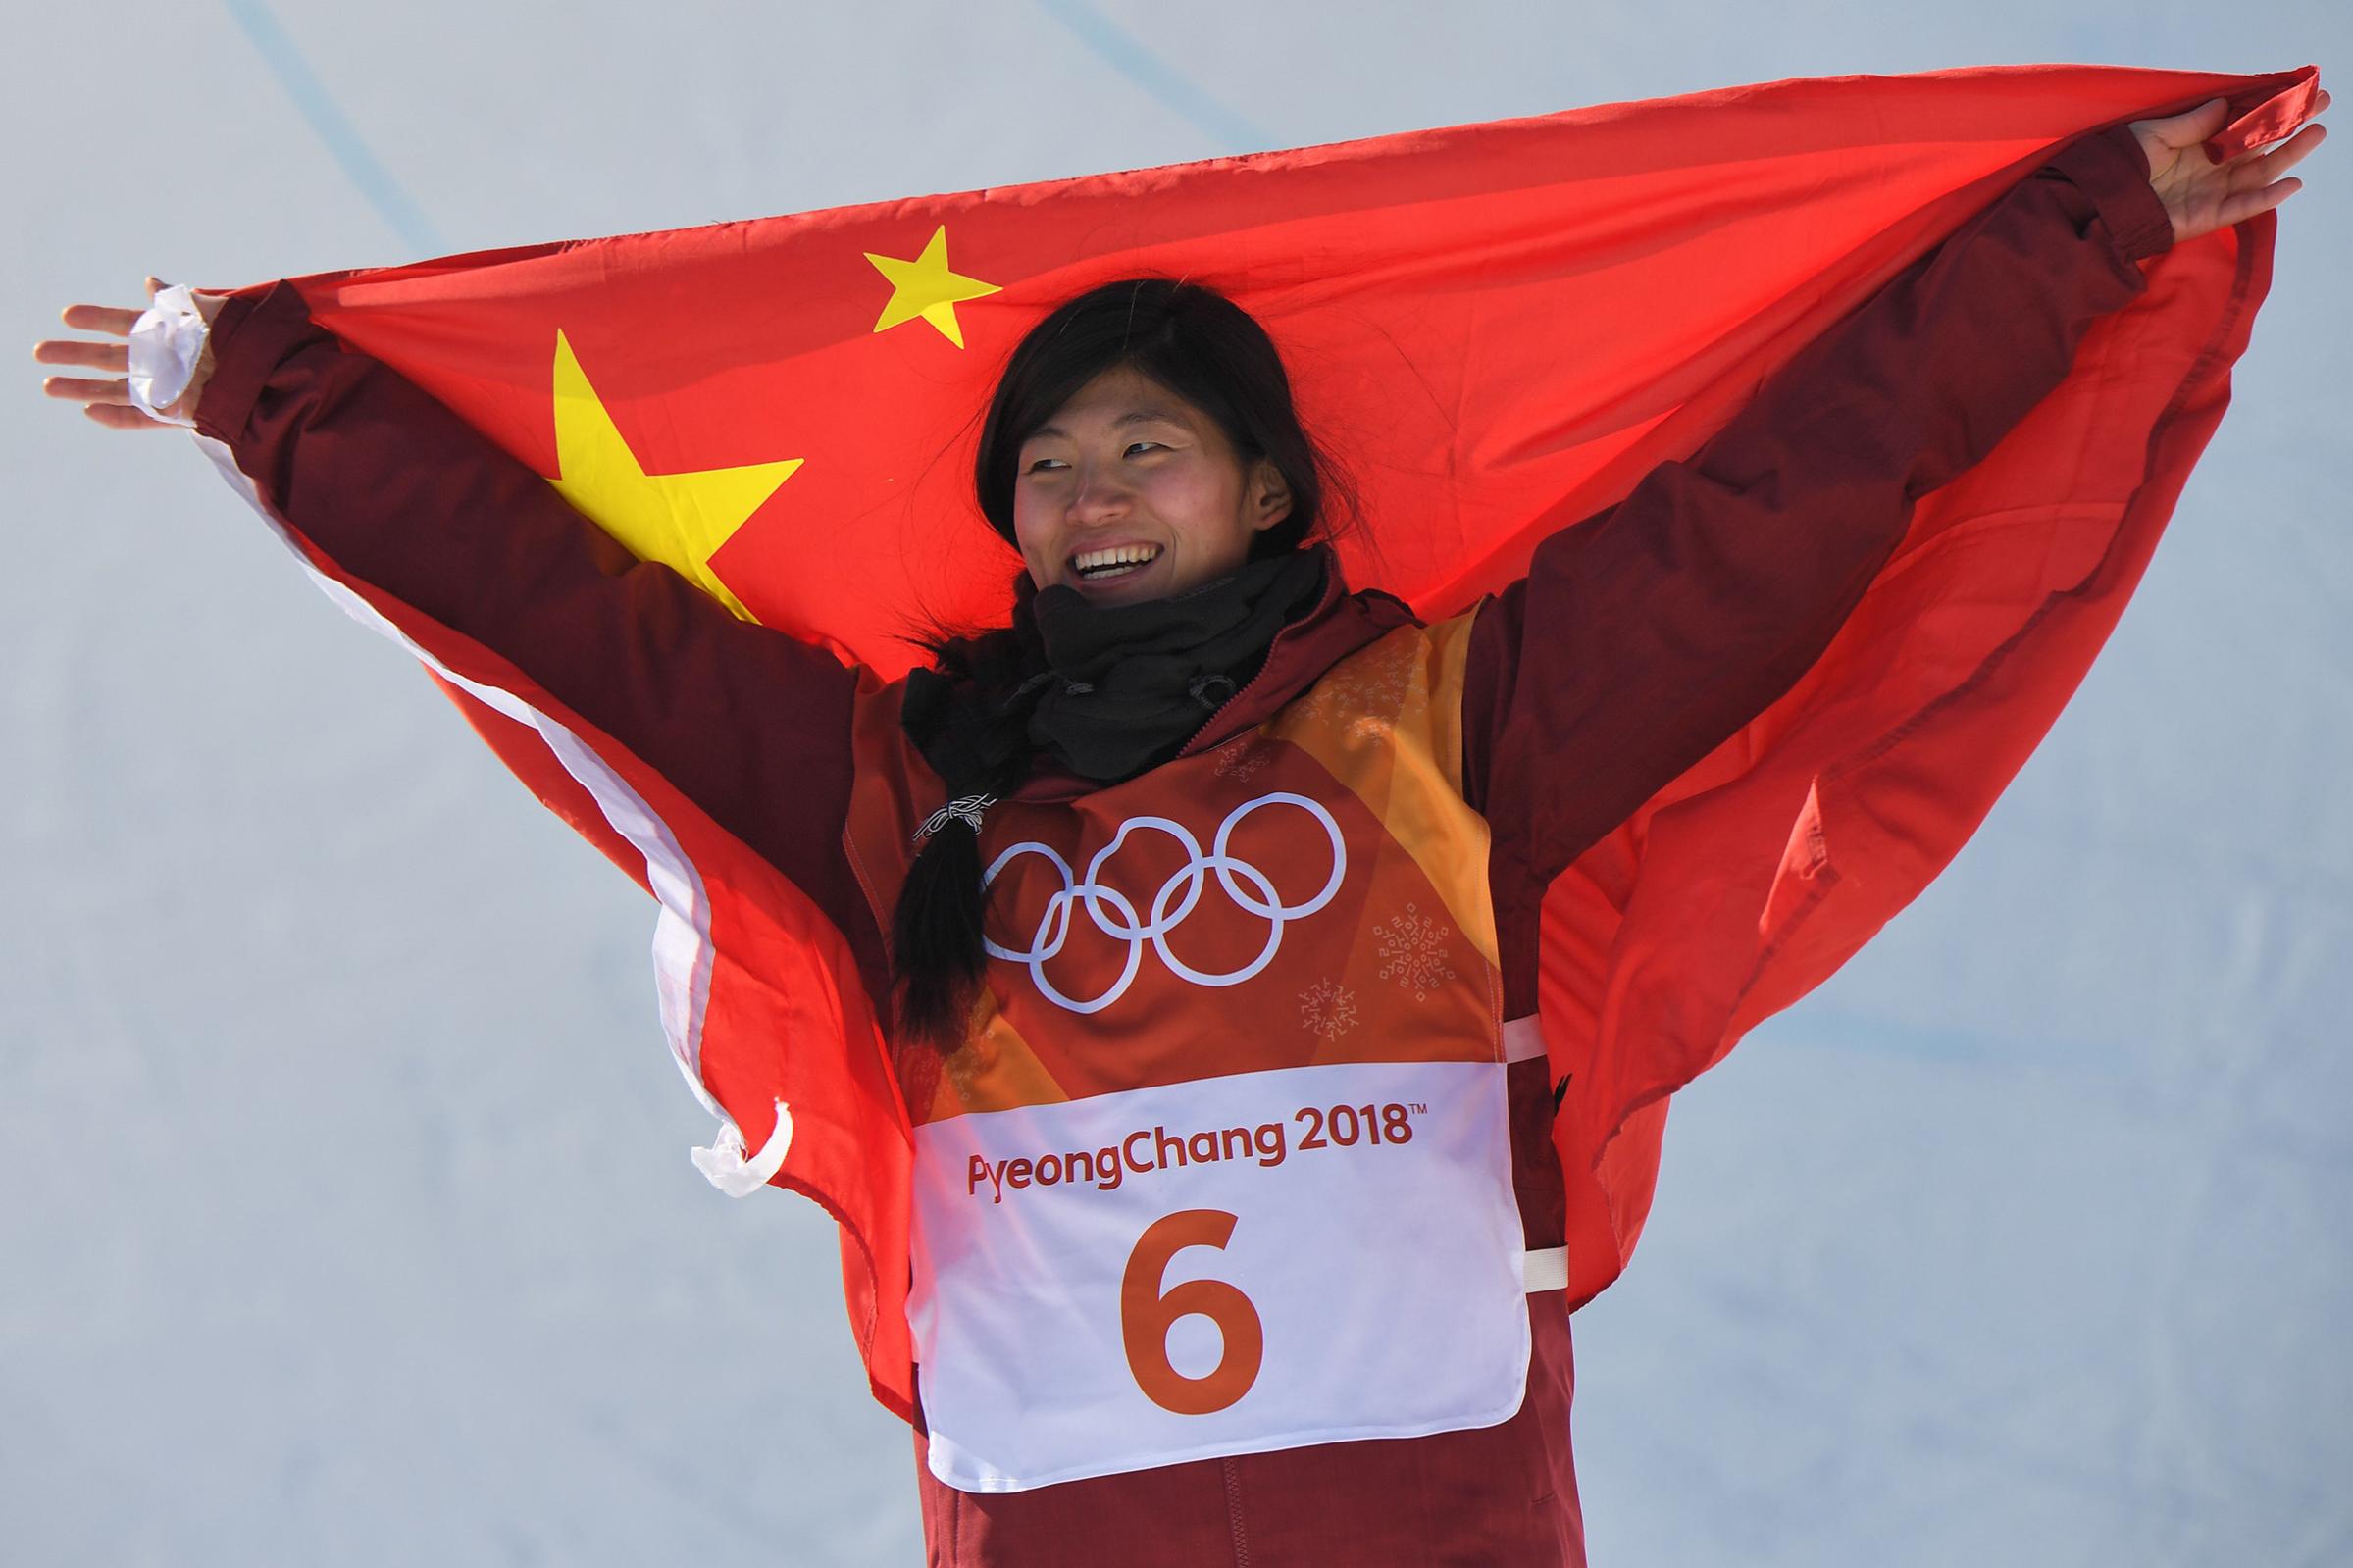 Silver medallist China's Liu Jiayu celebrates during the victory ceremony after the women's snowboard halfpipe final on Feb. 13, 2018.